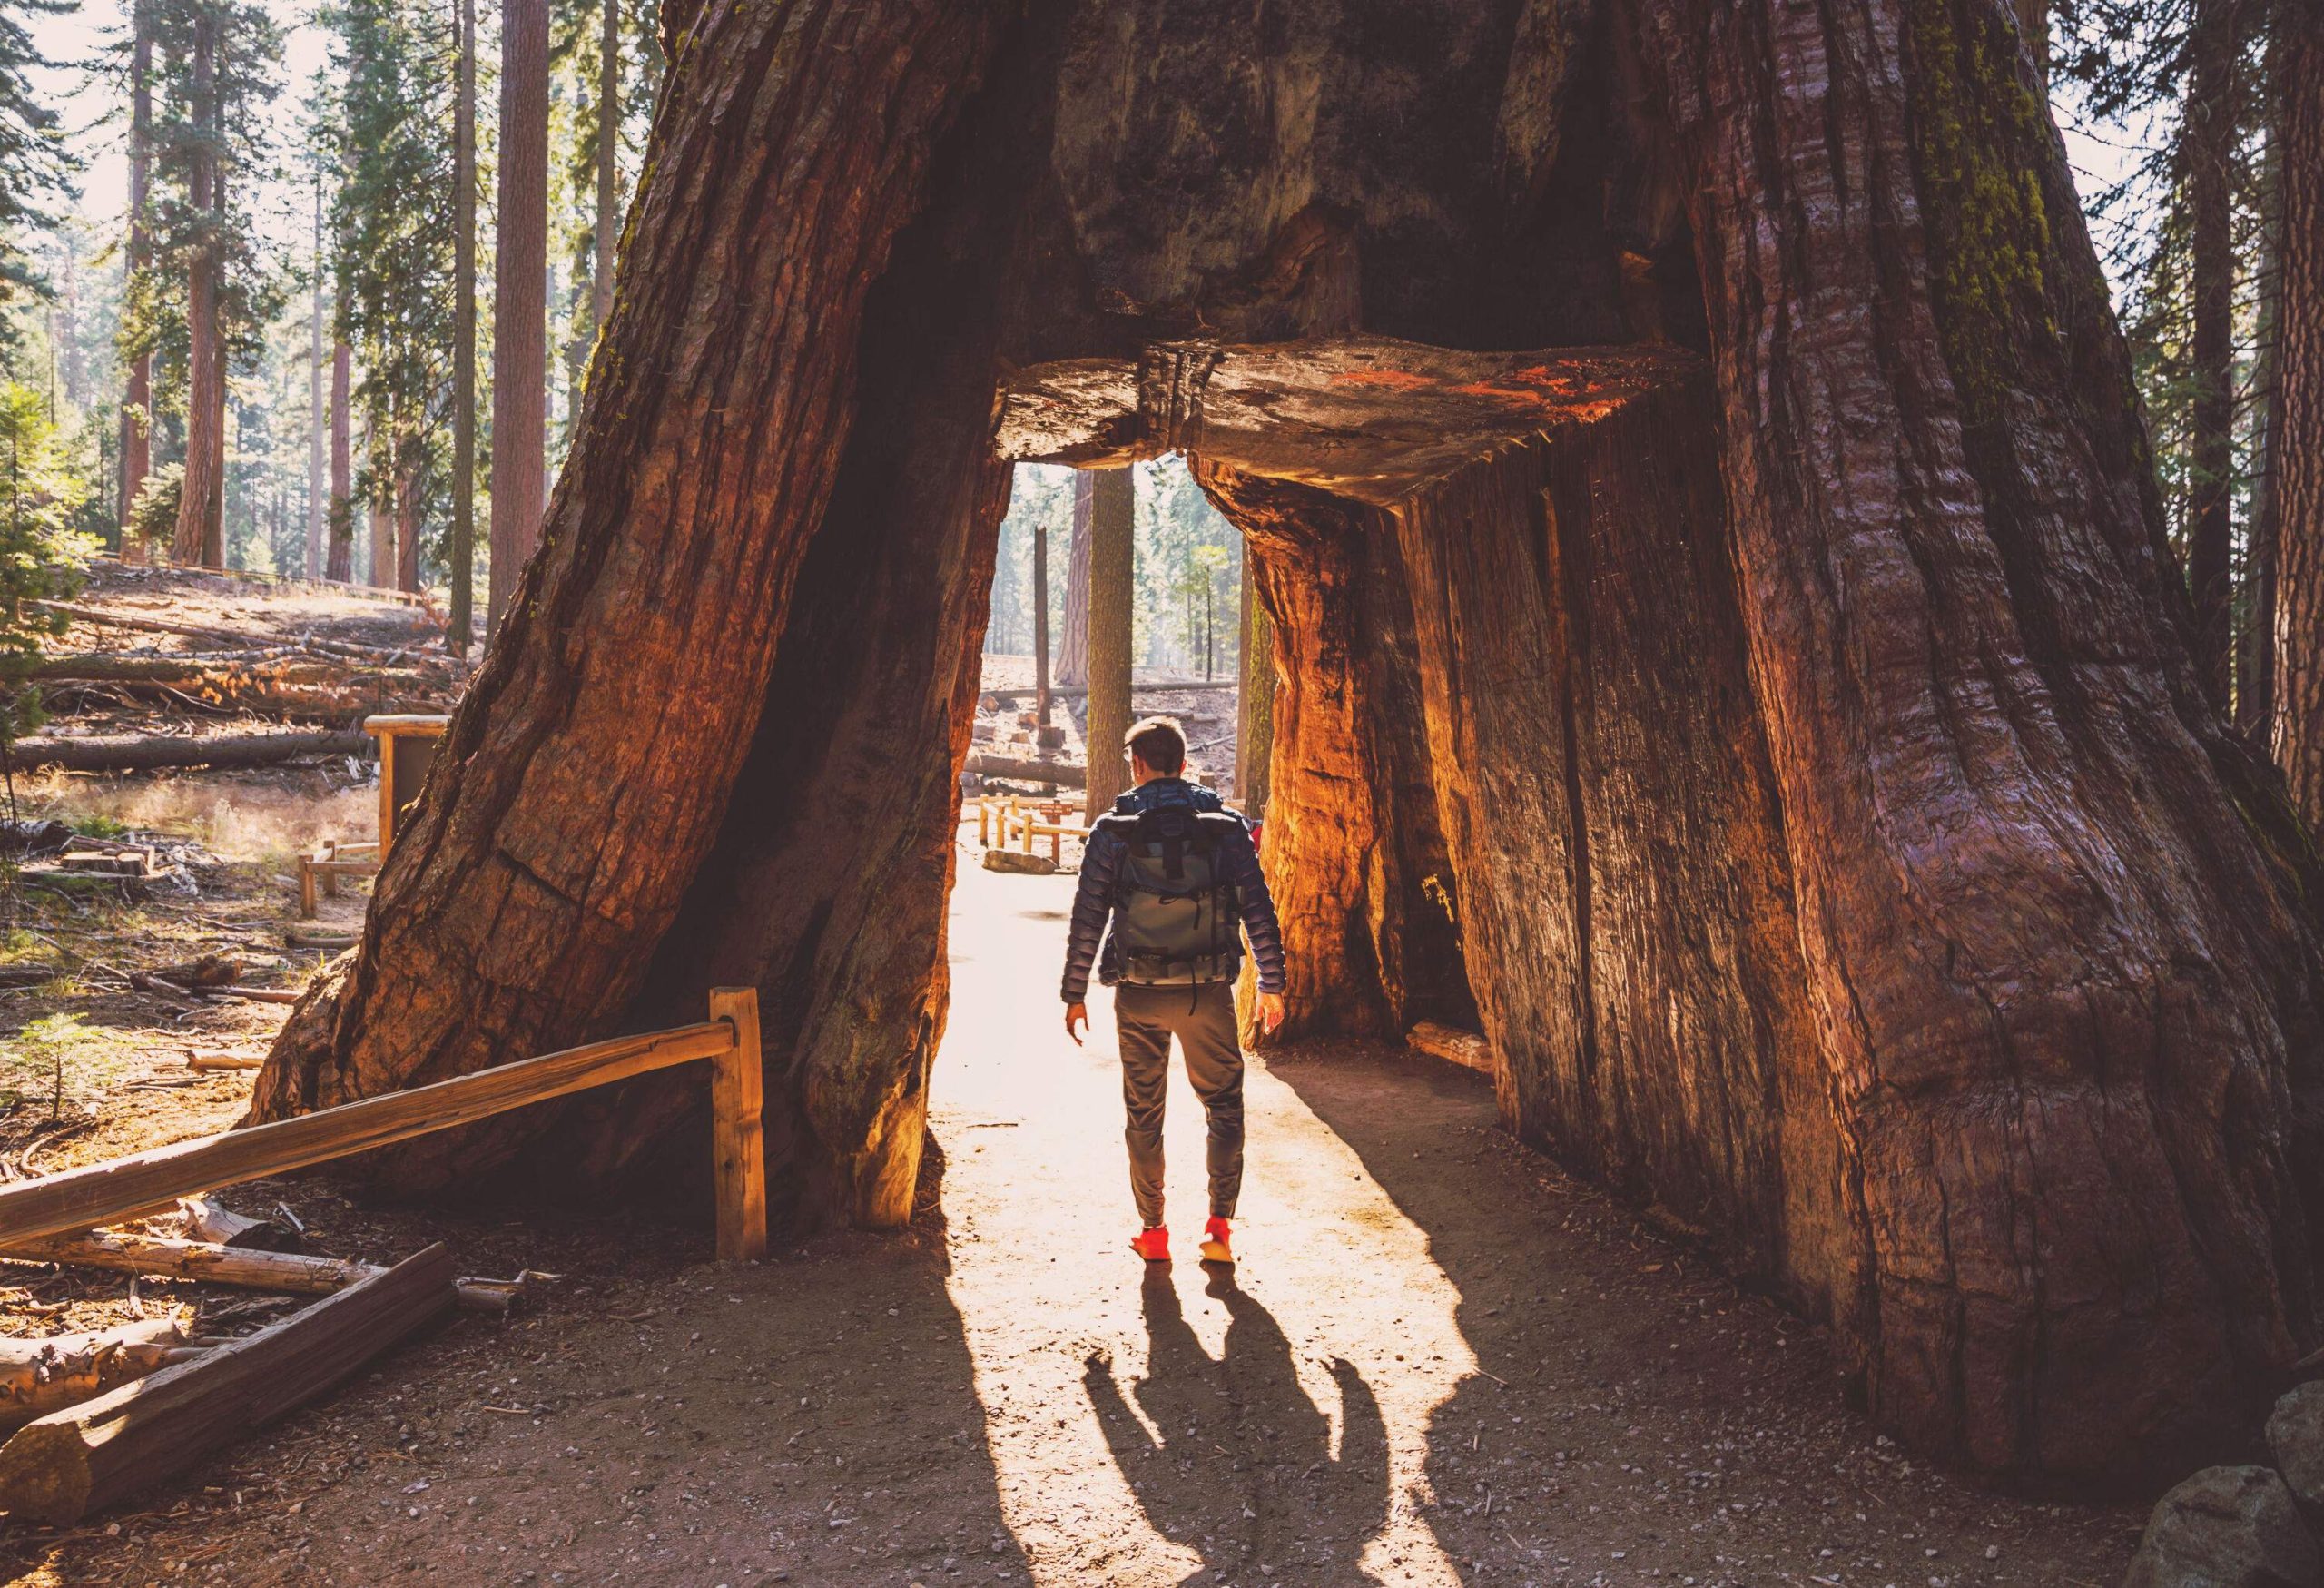 A person stands under a hollow passage of a big tree trunk.